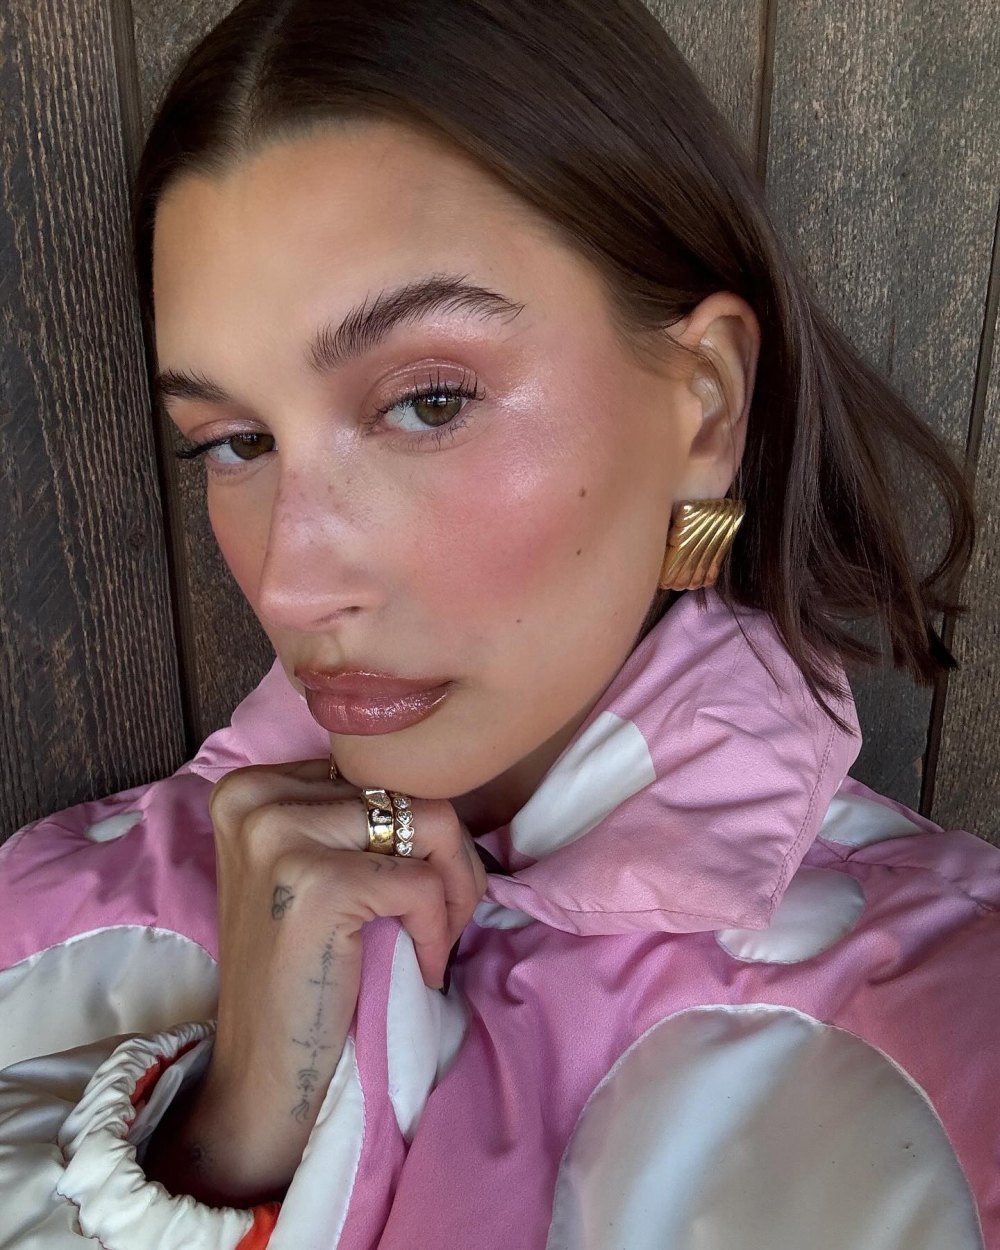 Hailey Bieber Is Giving Sugar Plum Fairy In Latest Holiday Makeup Tutorial